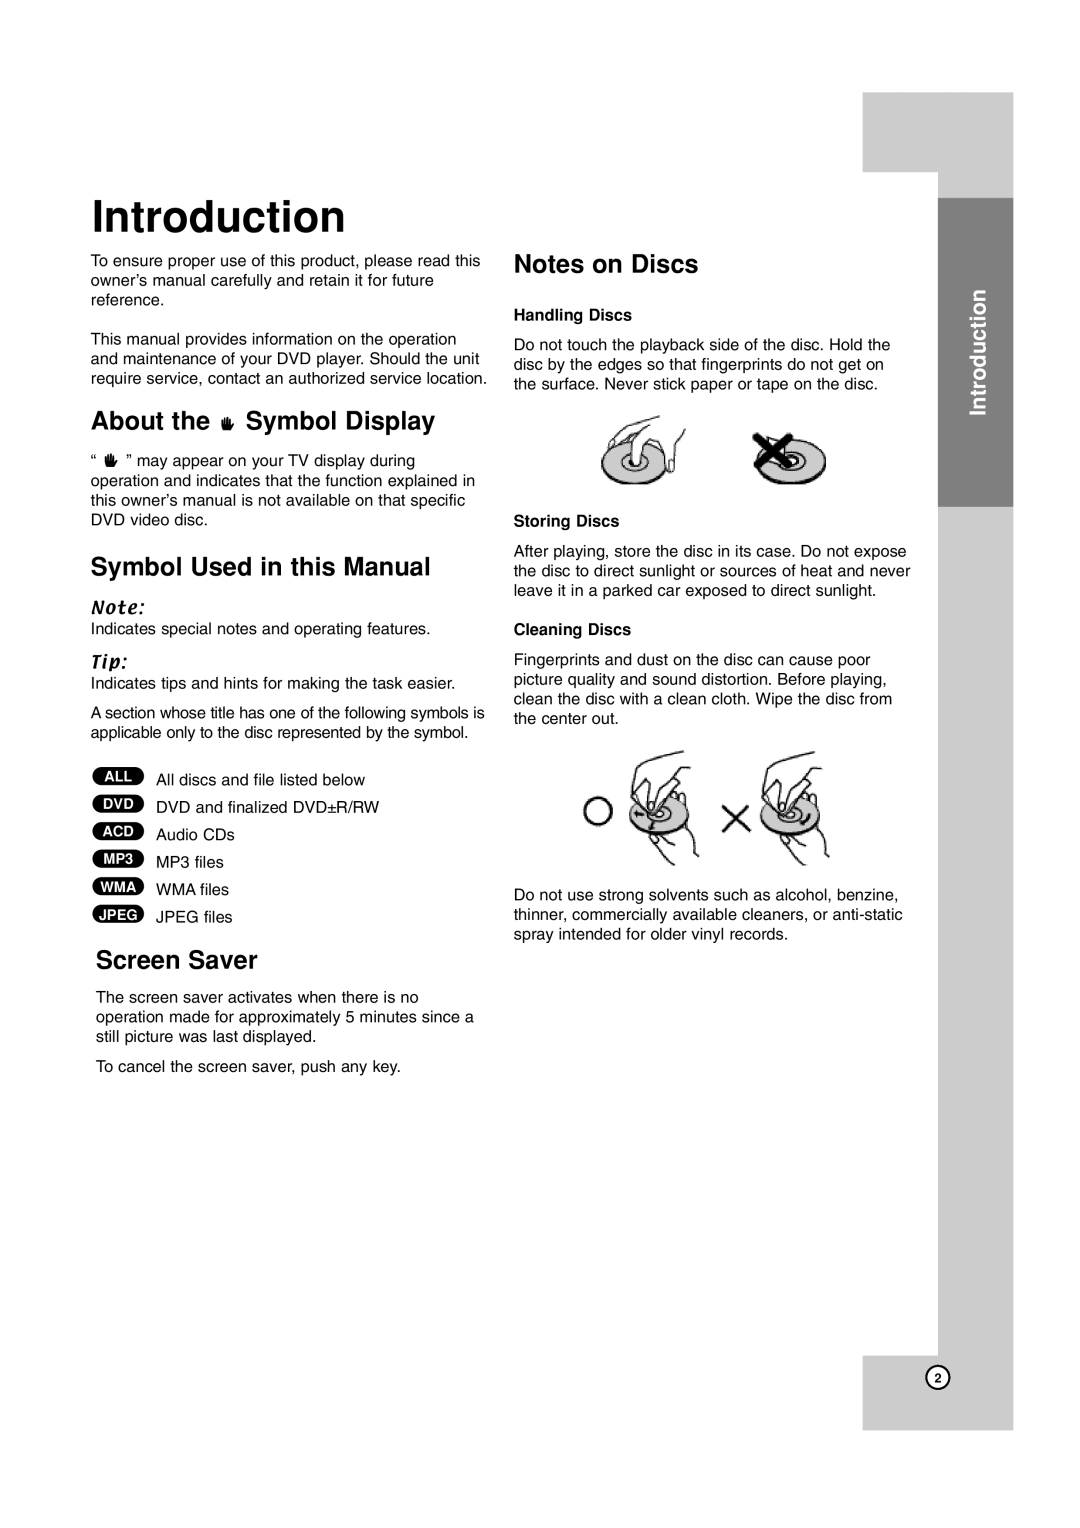 JVC TH-G40 Introduction, About the Symbol Display, Symbol Used in this Manual, Screen Saver, Notes on Discs, Storing Discs 